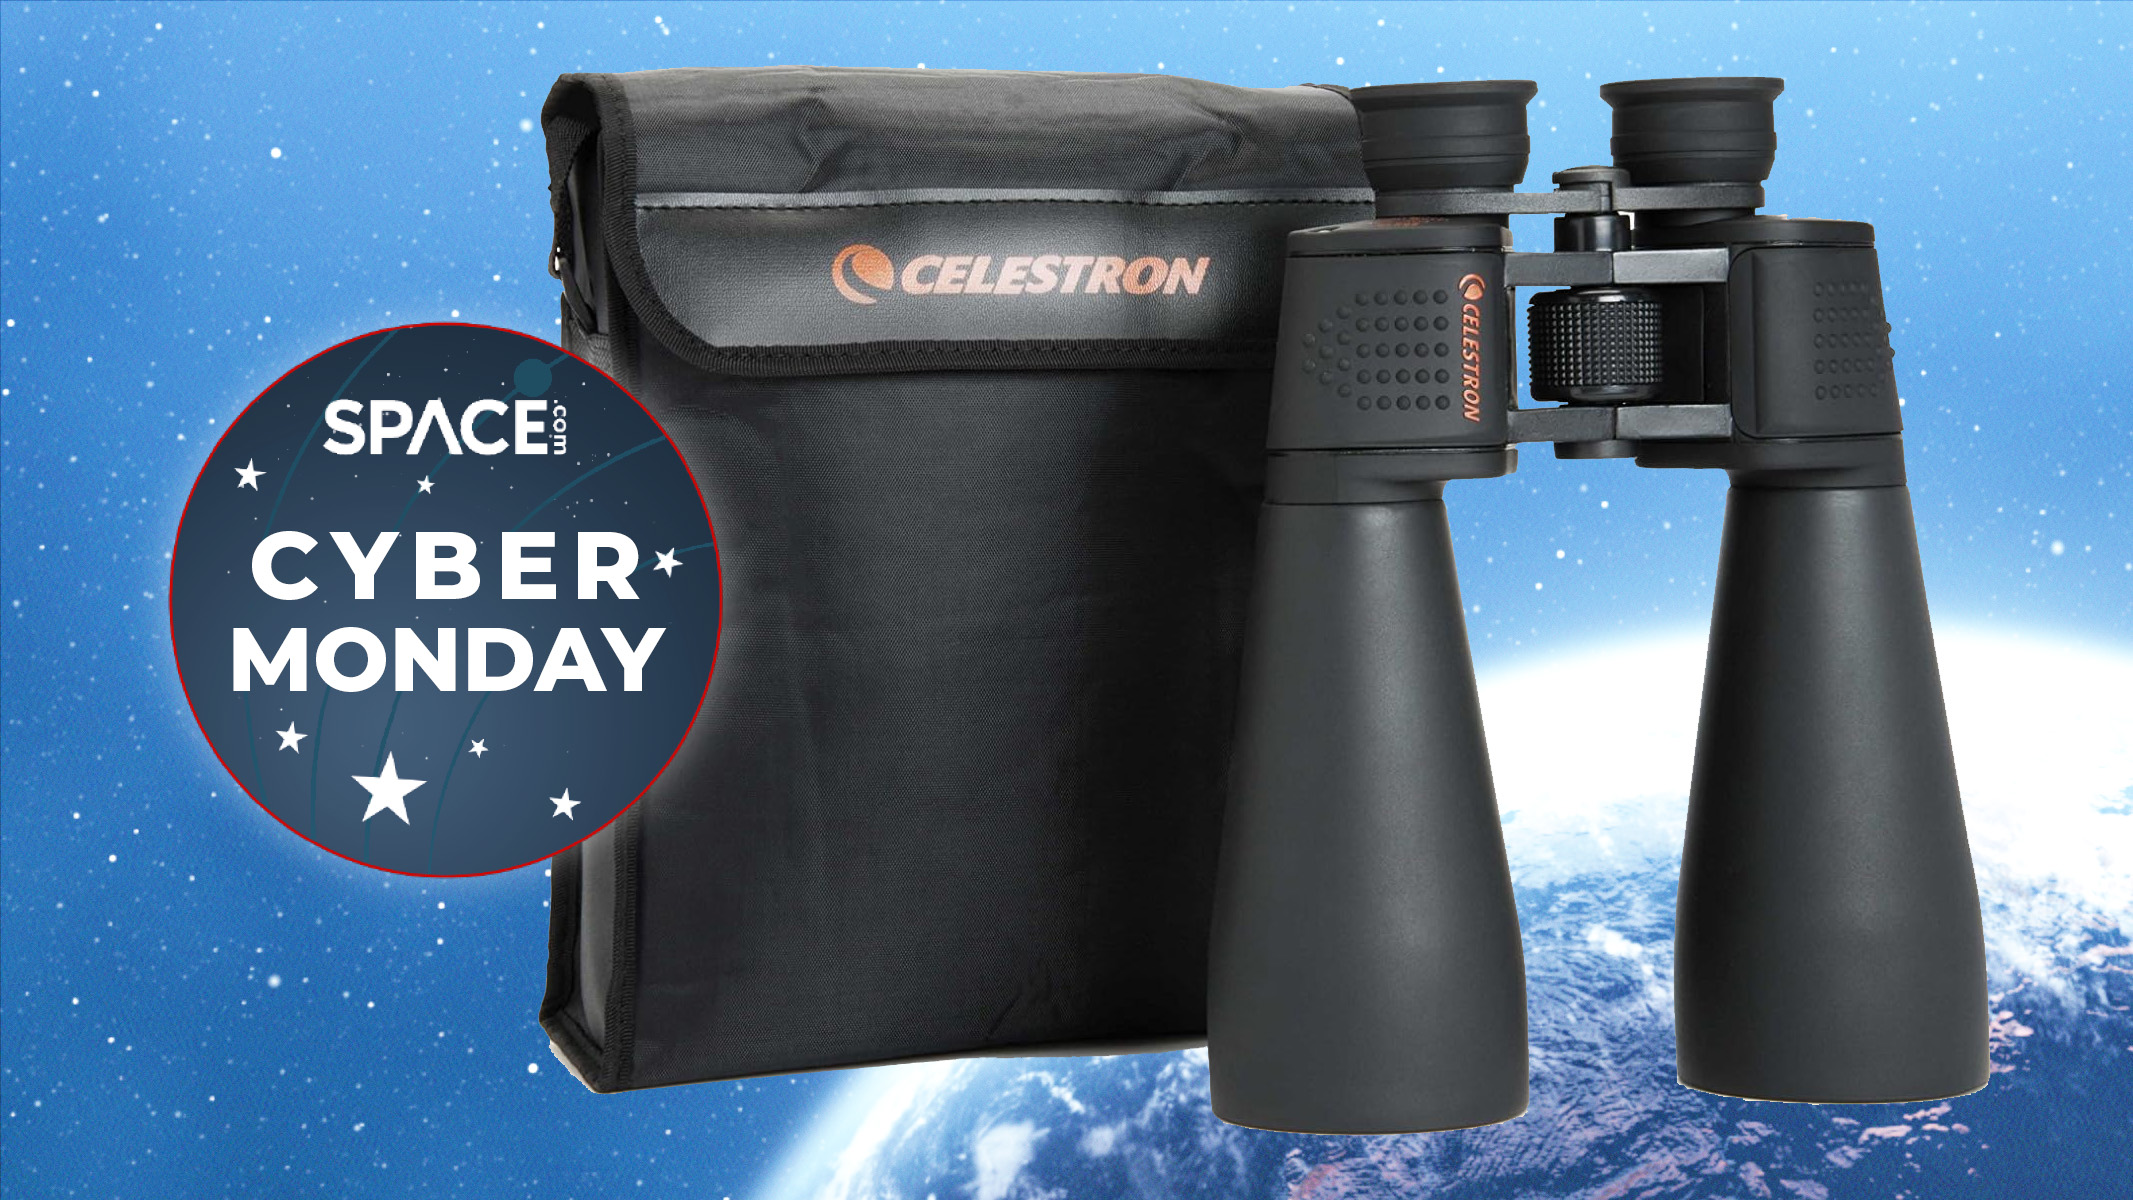 Save 35% on the Celestron SkyMaster 25×70 Binocular this Cyber Monday Space